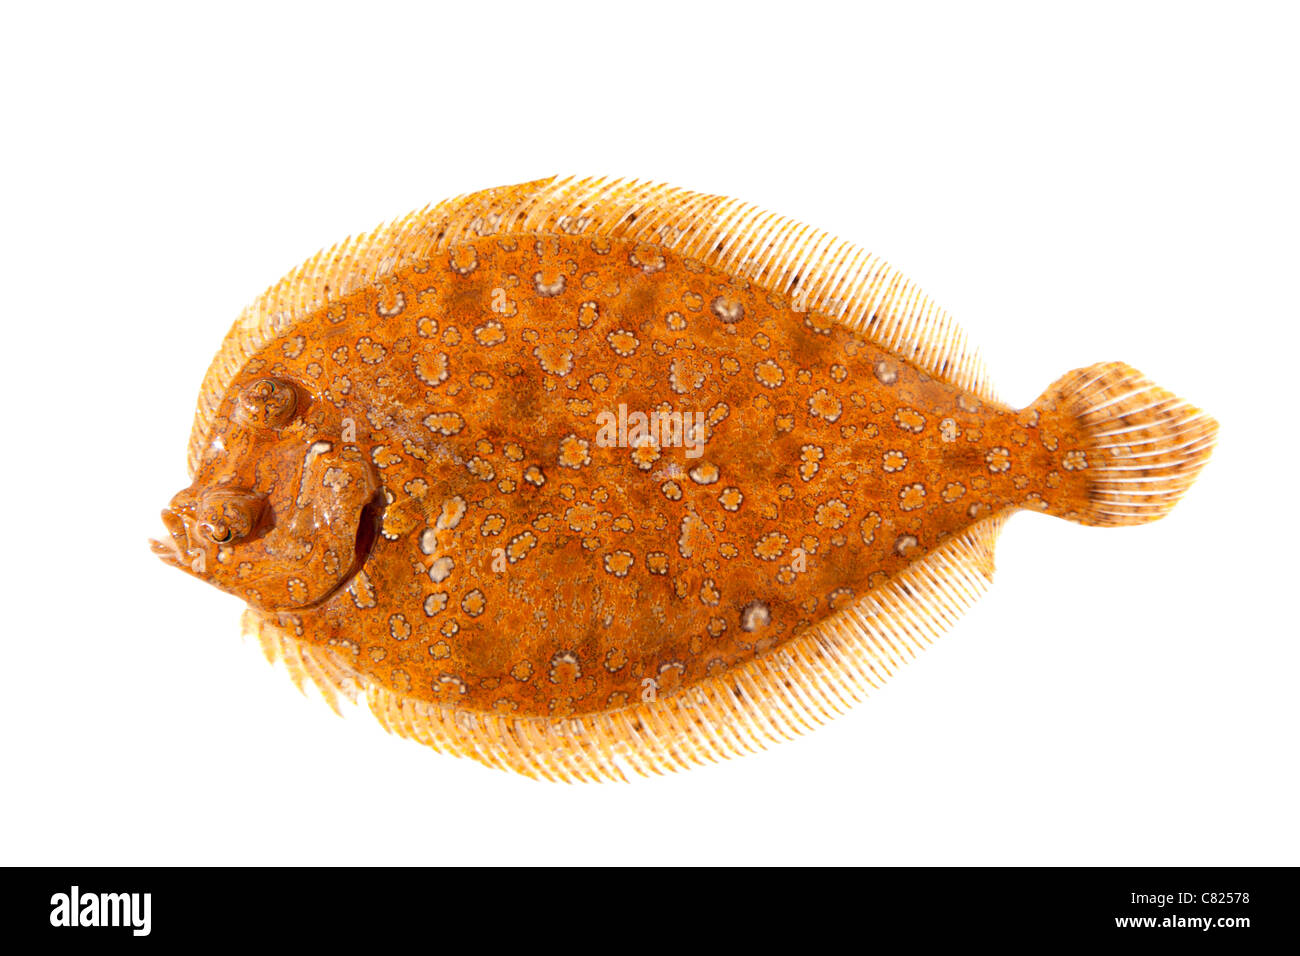 Trubot fish Psetta maxima isolated on white just after catch Stock Photo